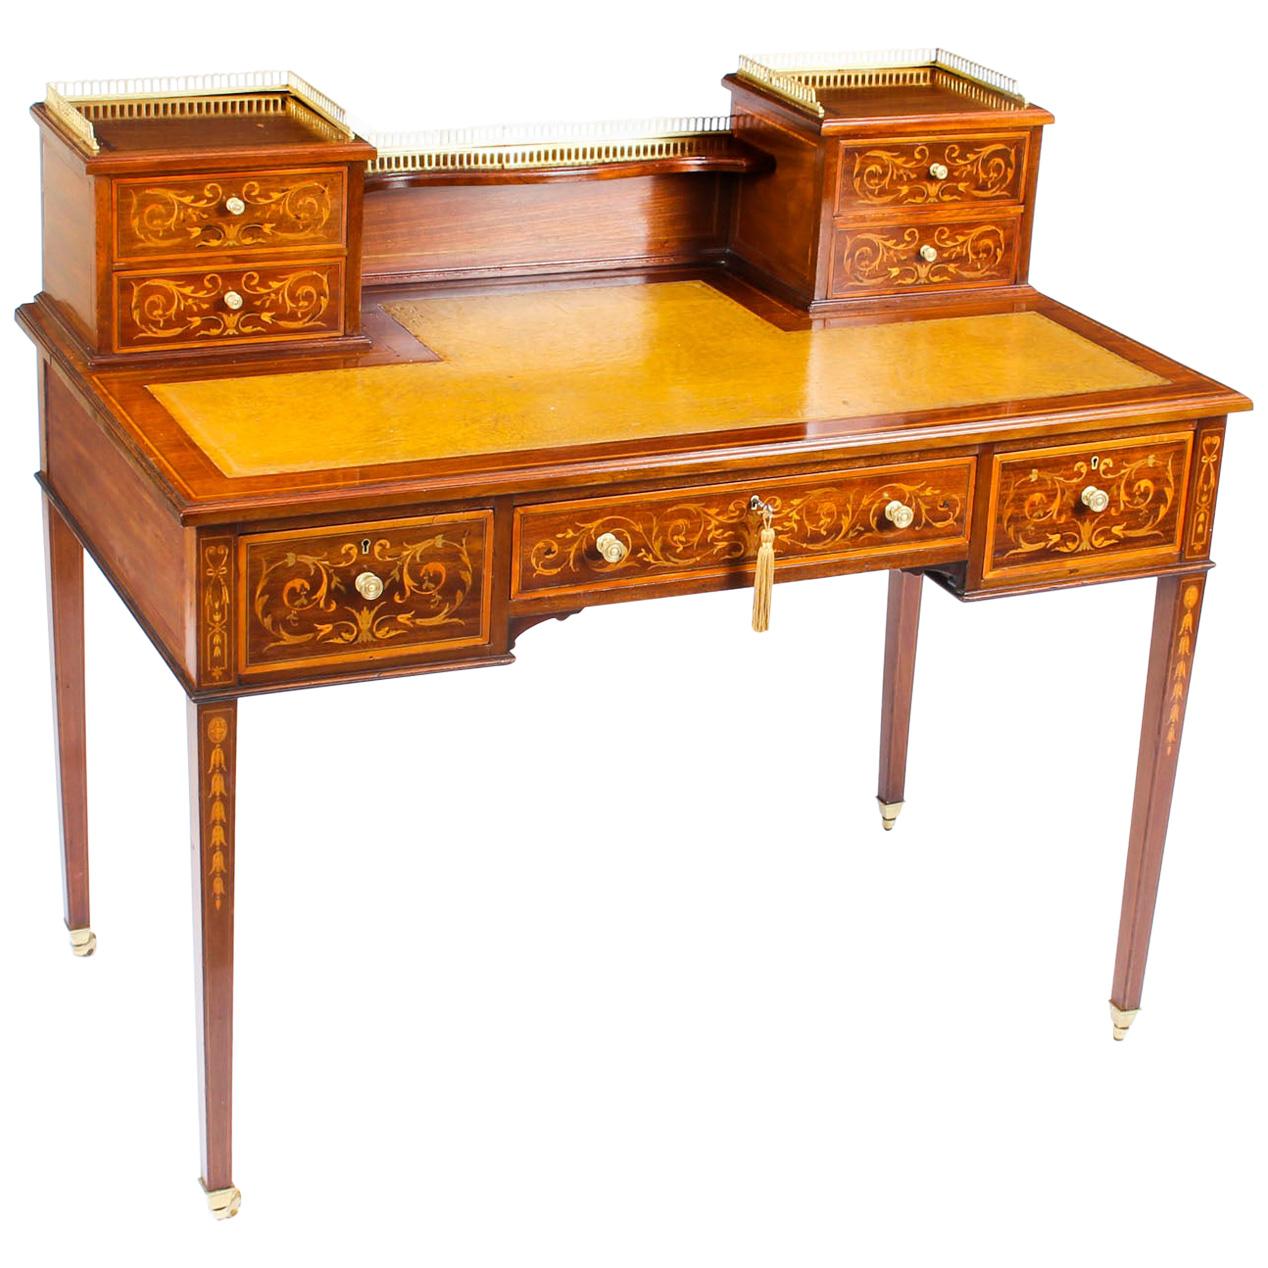 Antique Edwardian Mahogany and Marquetry Writing Table Desk, Early 20th Century